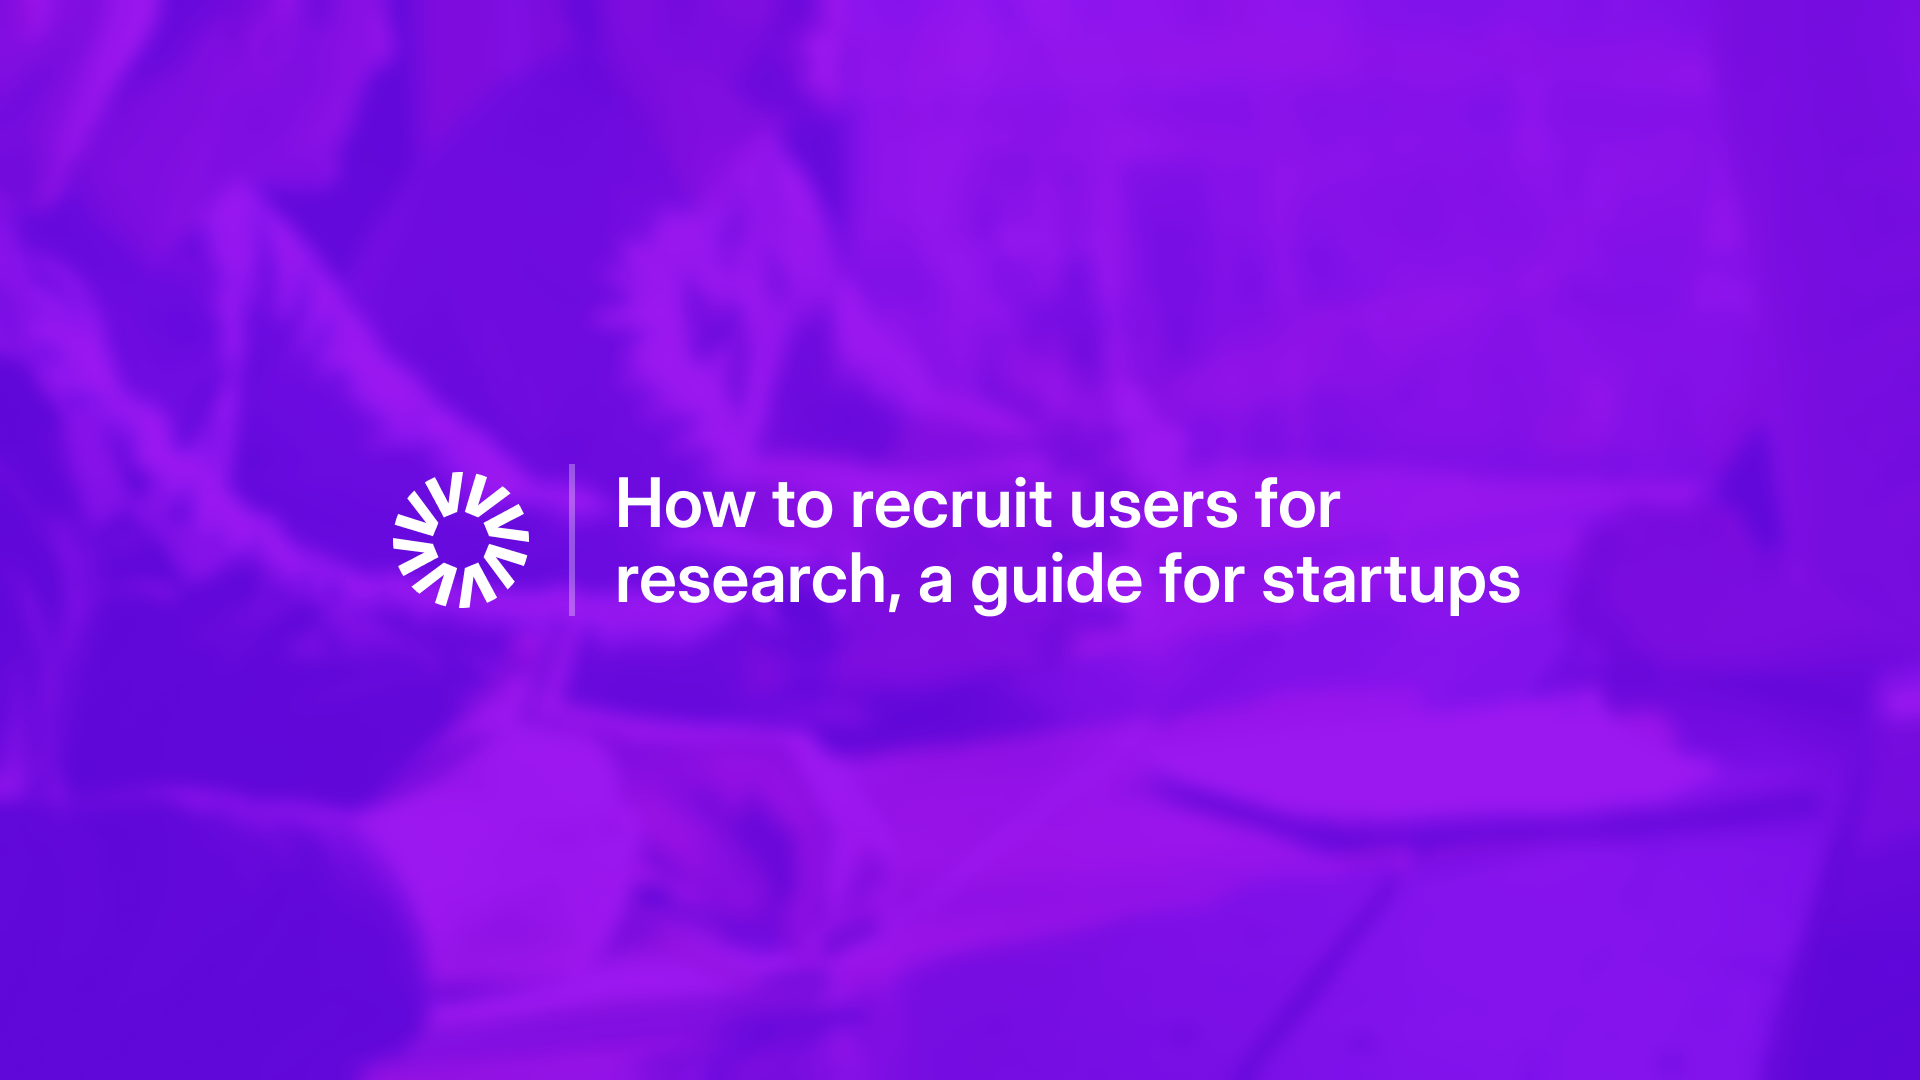 How to recruit users for research, a guide for startups